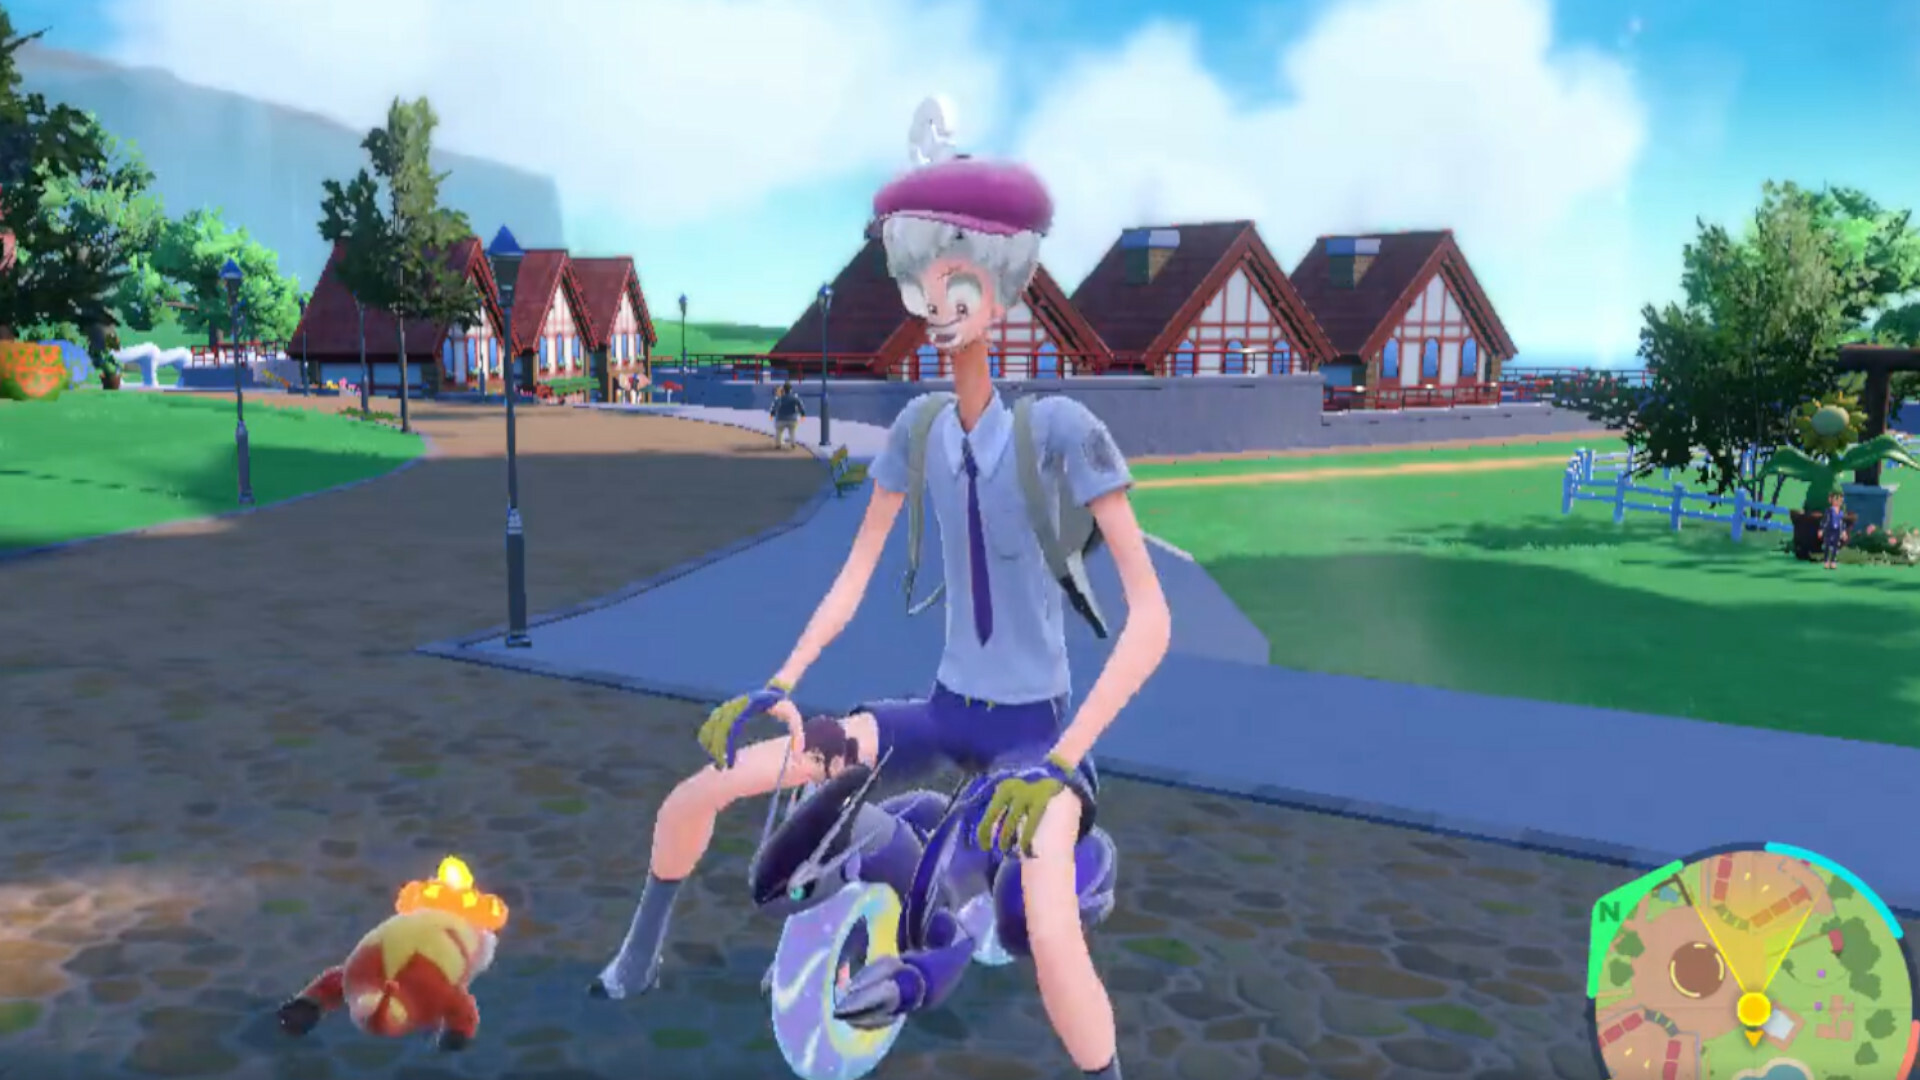 Pokemon Scarlet and Violet are a new technical low for Game Freak